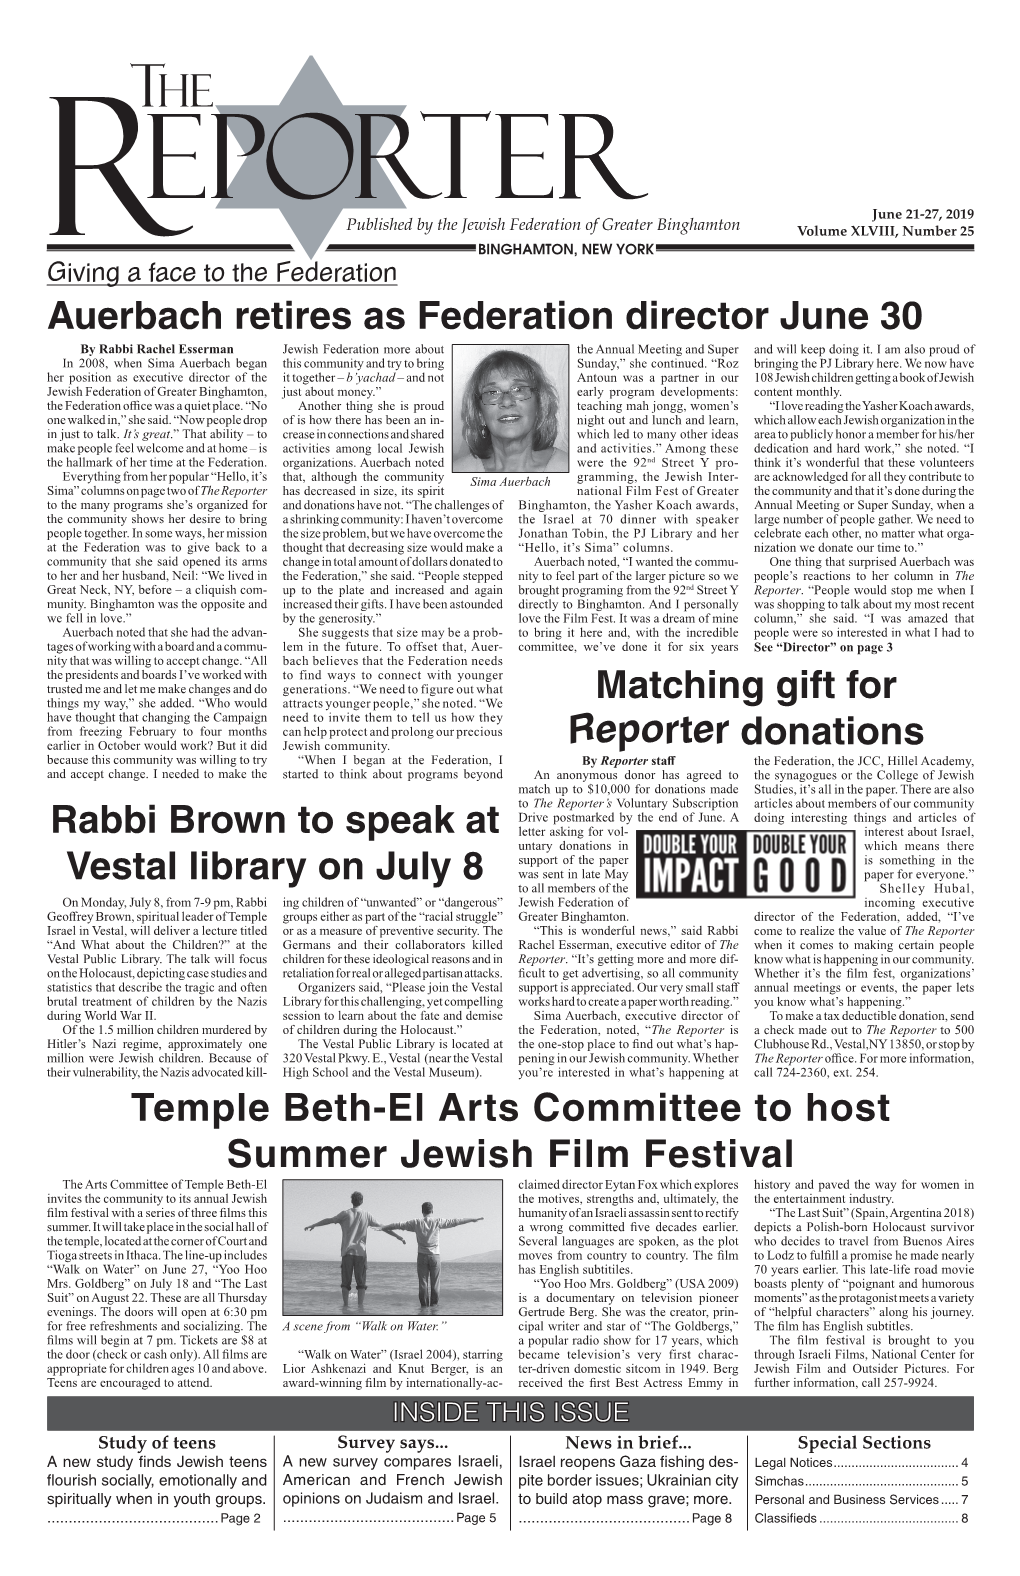 Matching Gift for Reporter Donations Auerbach Retires As Federation Director June 30 Rabbi Brown to Speak at Vestal Library on J